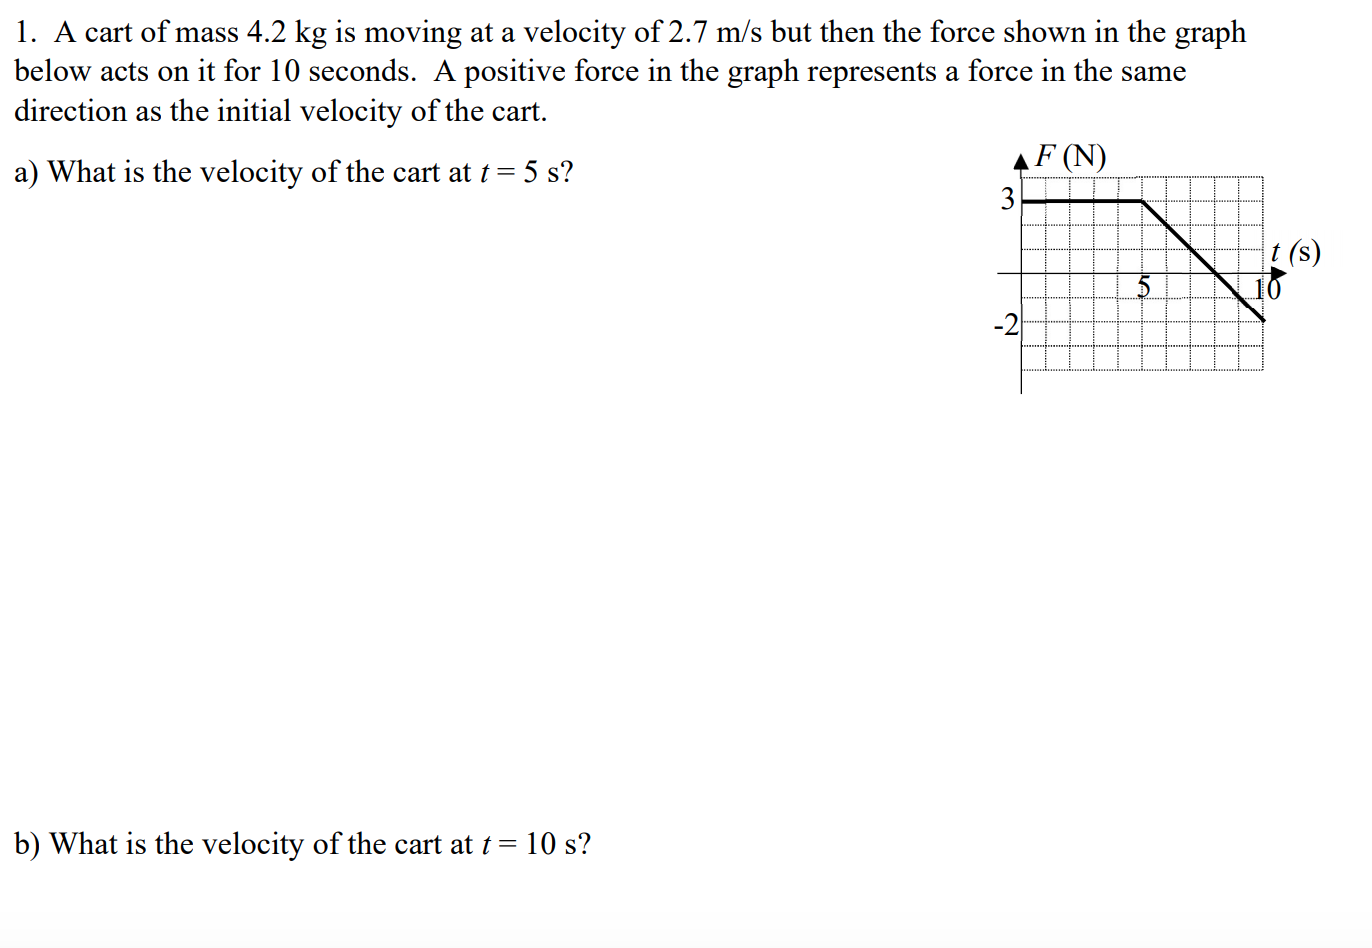 What is the velocity of the cart at t = 5 s?
